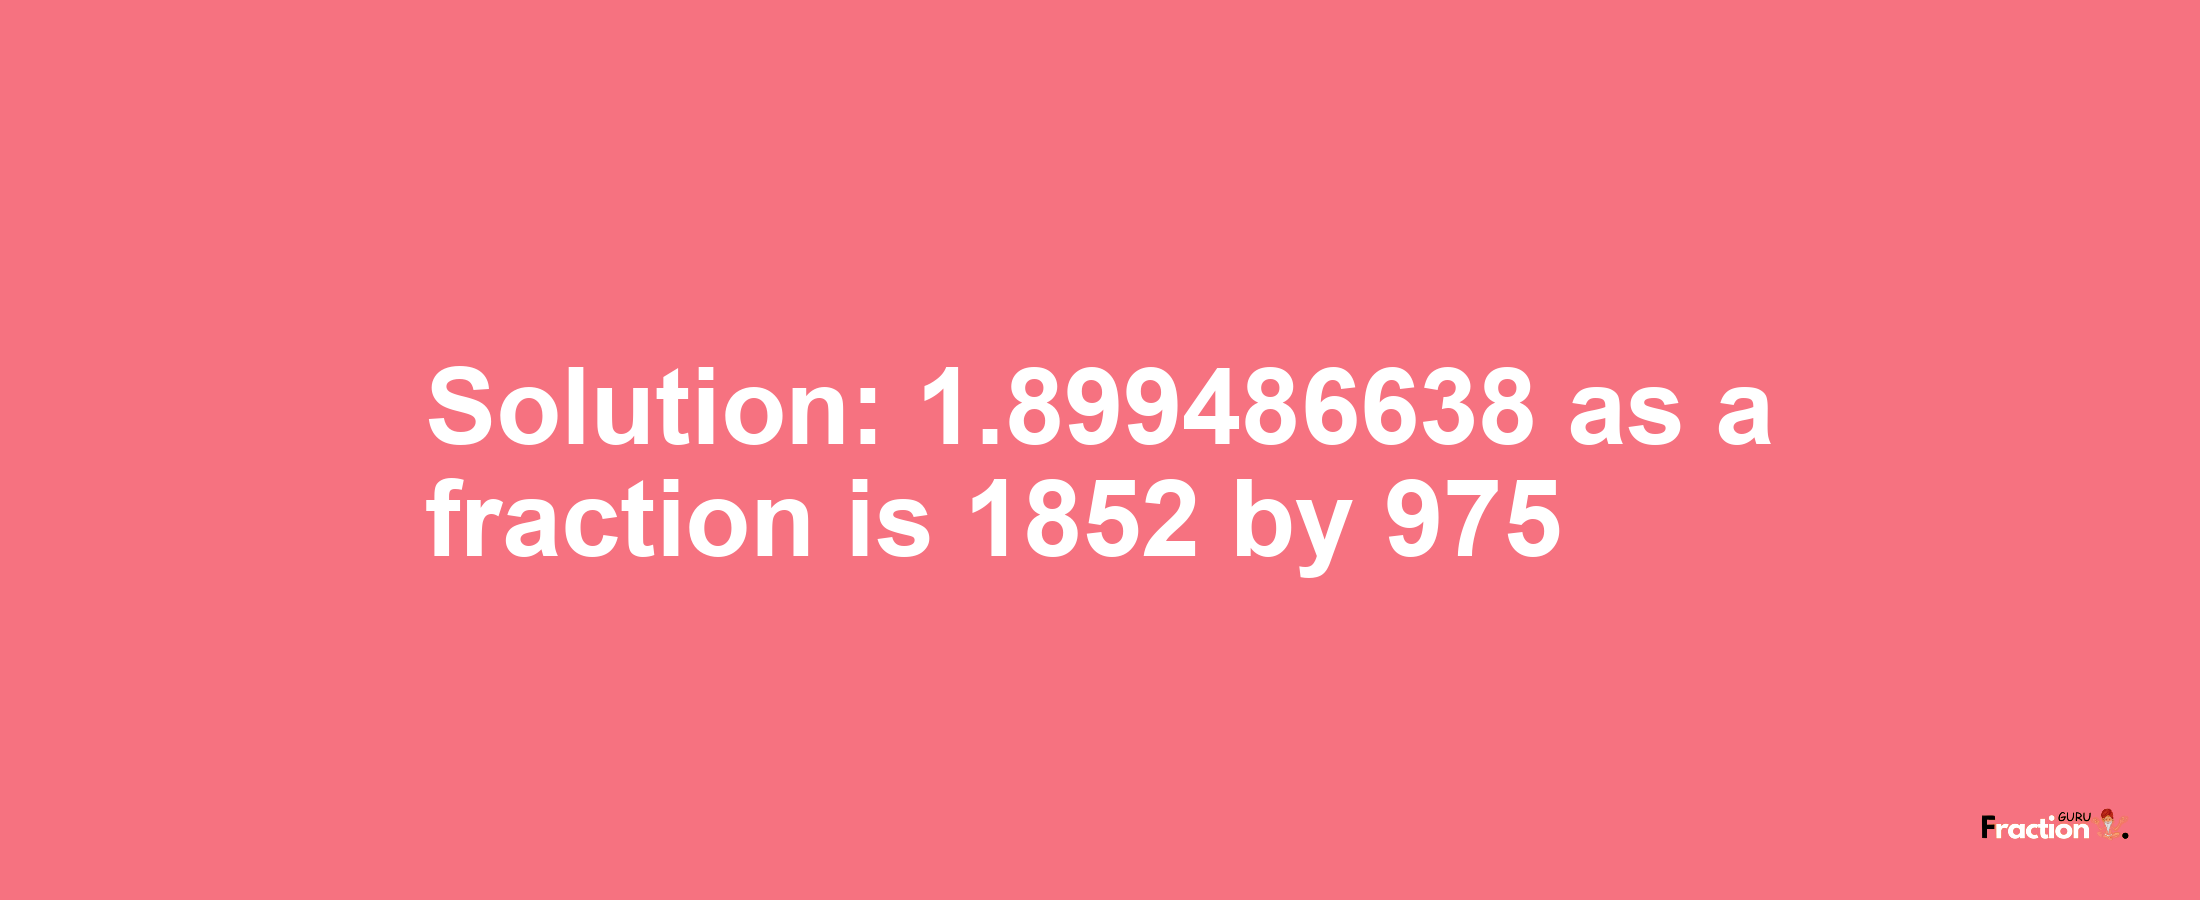 Solution:1.899486638 as a fraction is 1852/975